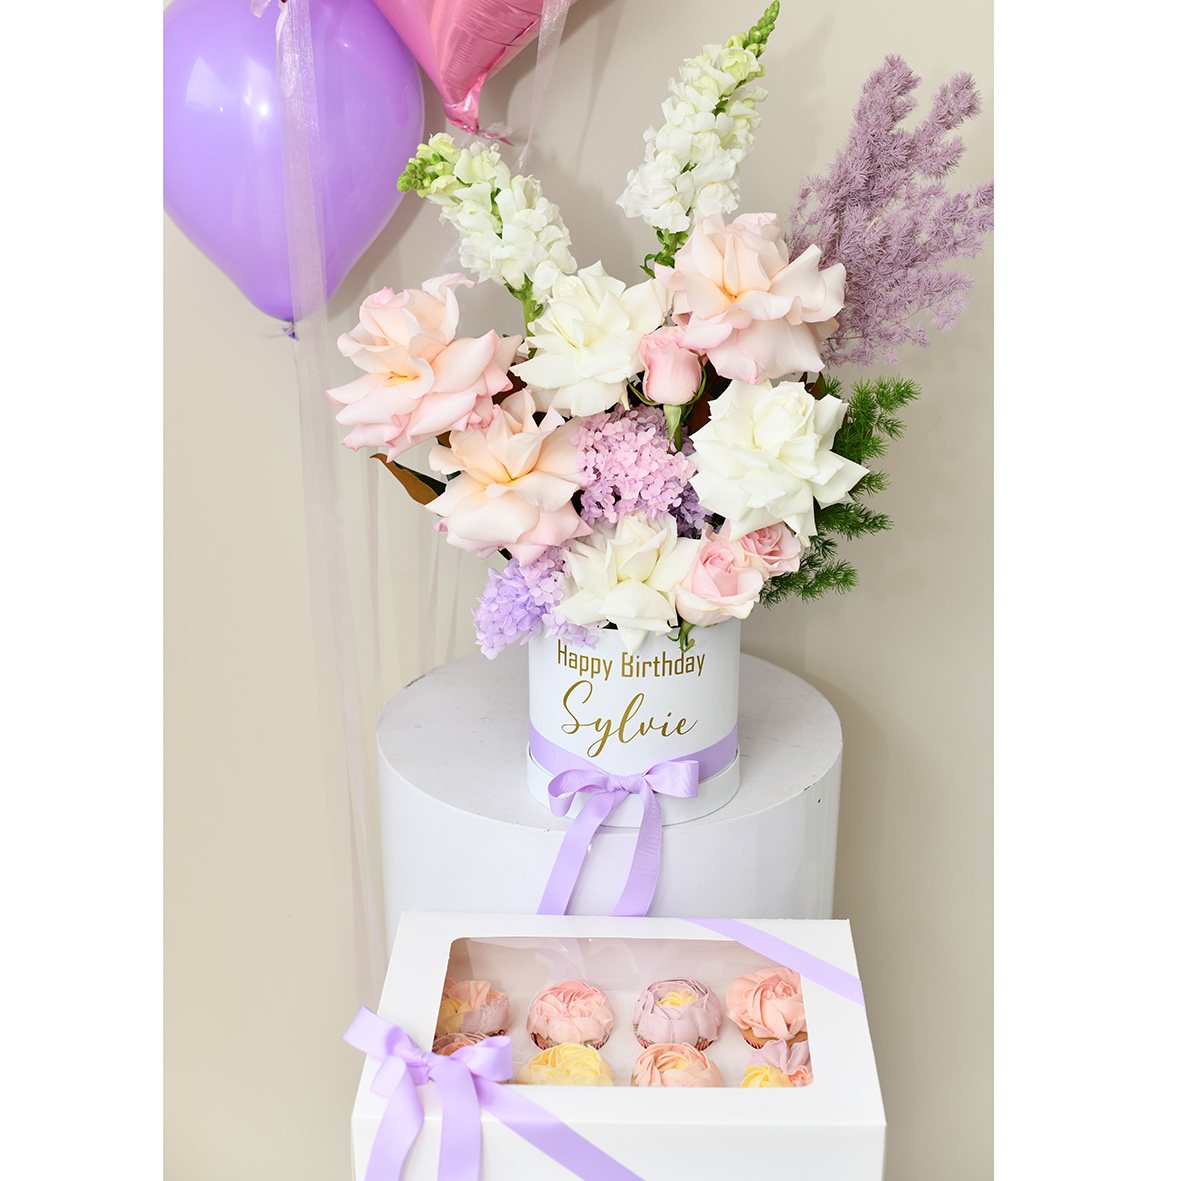 Cakes and Flowers Delivery  Sydney - WOWGIFTS 02